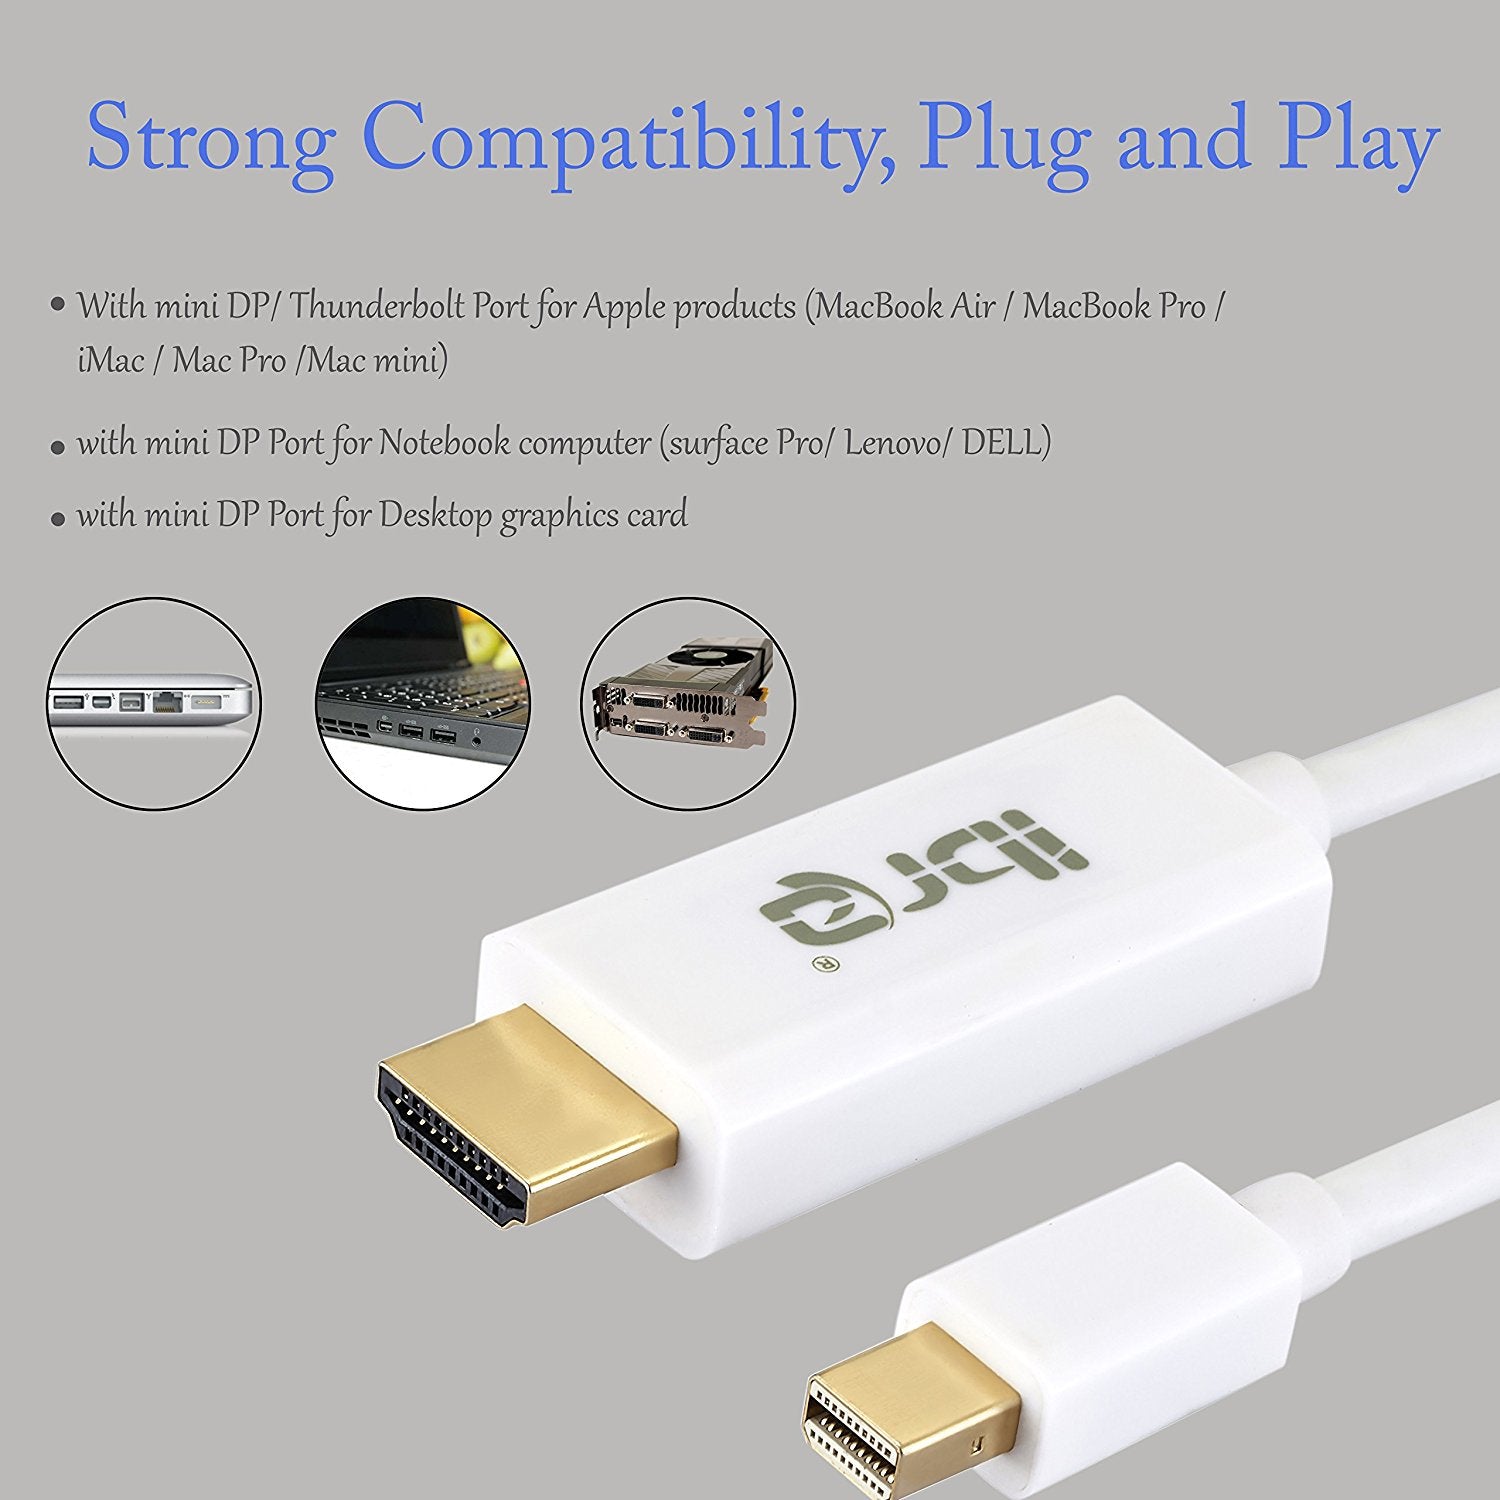 1M-IBRA Mini Display Port DP to HDMI Cable Adapter For iMac MacBook Pro Air LCD TV | Thunderbolt Compatible